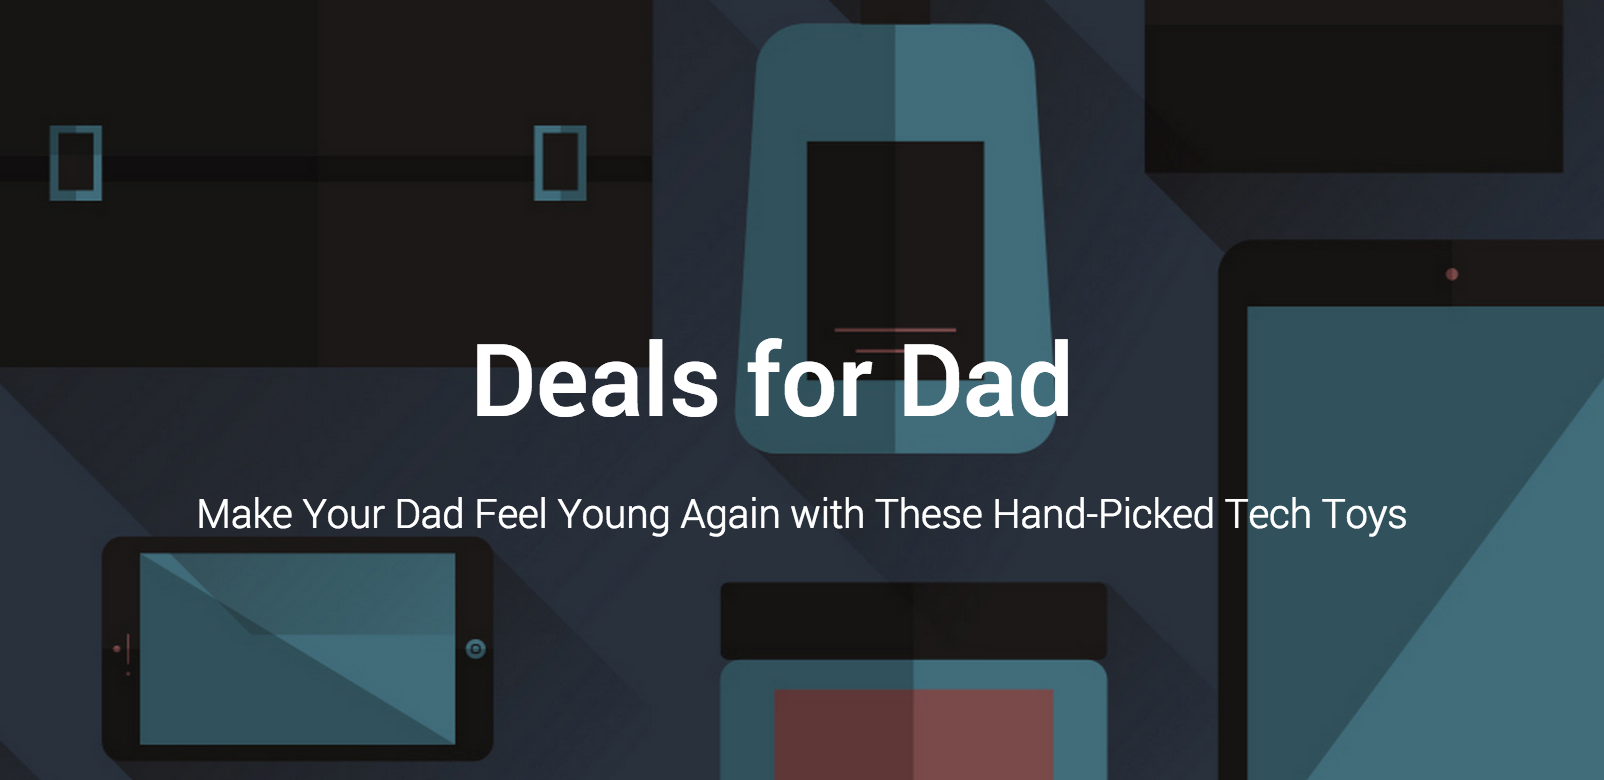 TechSpot Store: Gifts for Father's Day